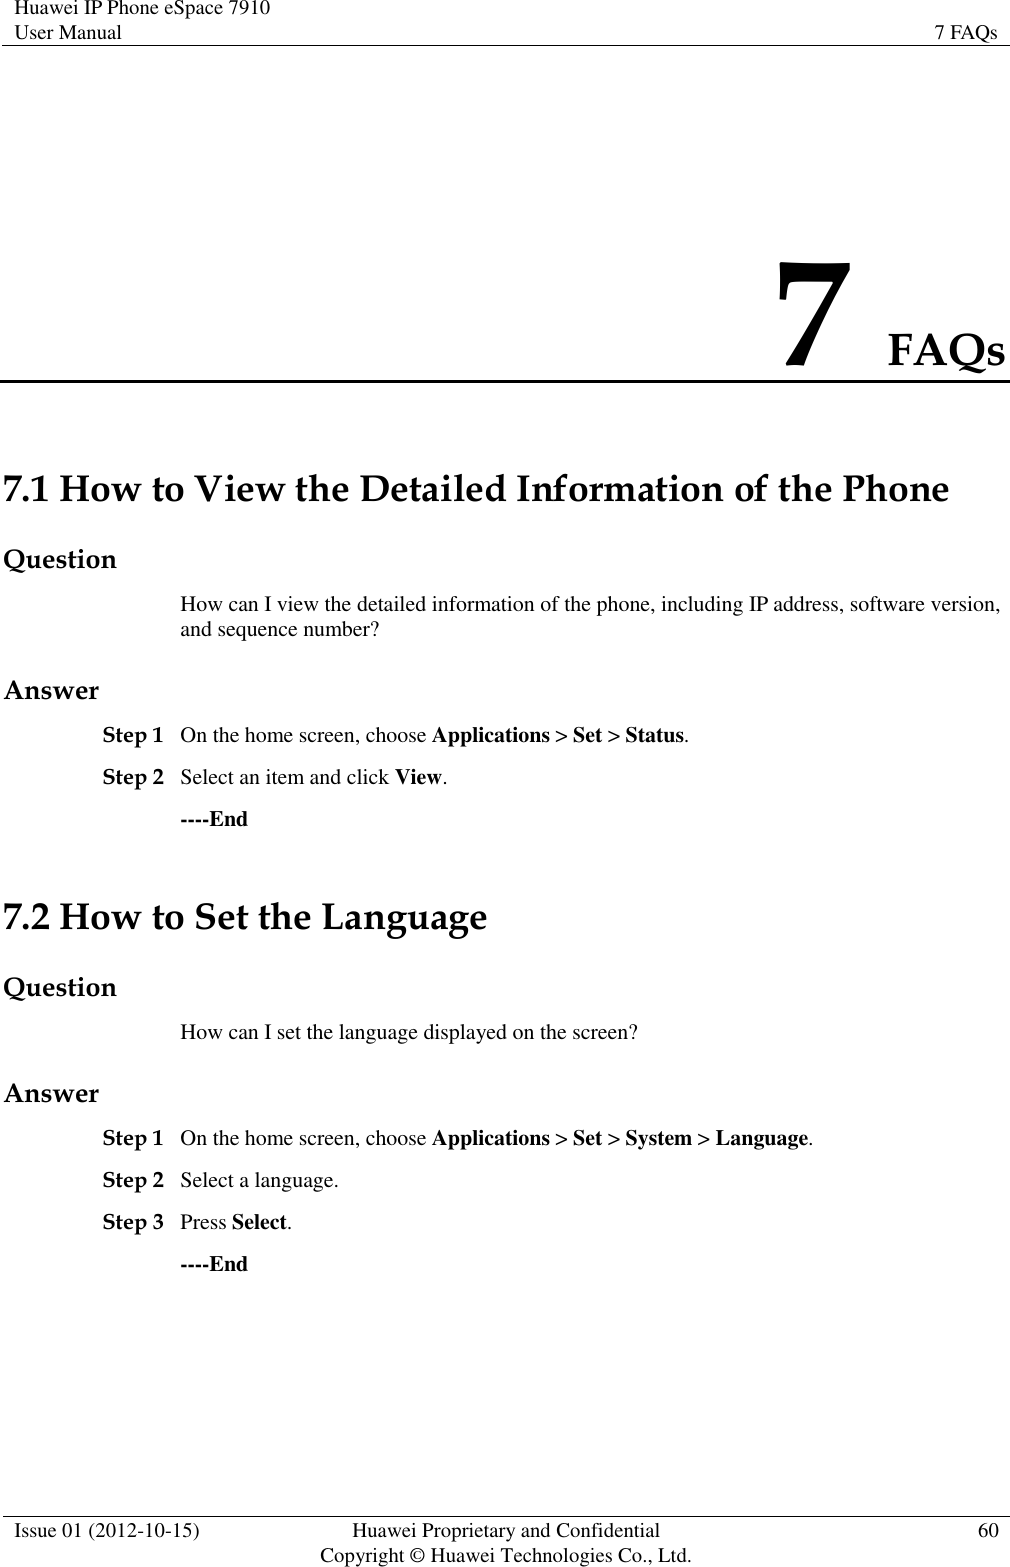 Huawei IP Phone eSpace 7910 User Manual 7 FAQs  Issue 01 (2012-10-15) Huawei Proprietary and Confidential                                     Copyright © Huawei Technologies Co., Ltd. 60  7 FAQs 7.1 How to View the Detailed Information of the Phone Question How can I view the detailed information of the phone, including IP address, software version, and sequence number? Answer Step 1 On the home screen, choose Applications &gt; Set &gt; Status. Step 2 Select an item and click View. ----End 7.2 How to Set the Language Question How can I set the language displayed on the screen? Answer Step 1 On the home screen, choose Applications &gt; Set &gt; System &gt; Language. Step 2 Select a language. Step 3 Press Select. ----End 